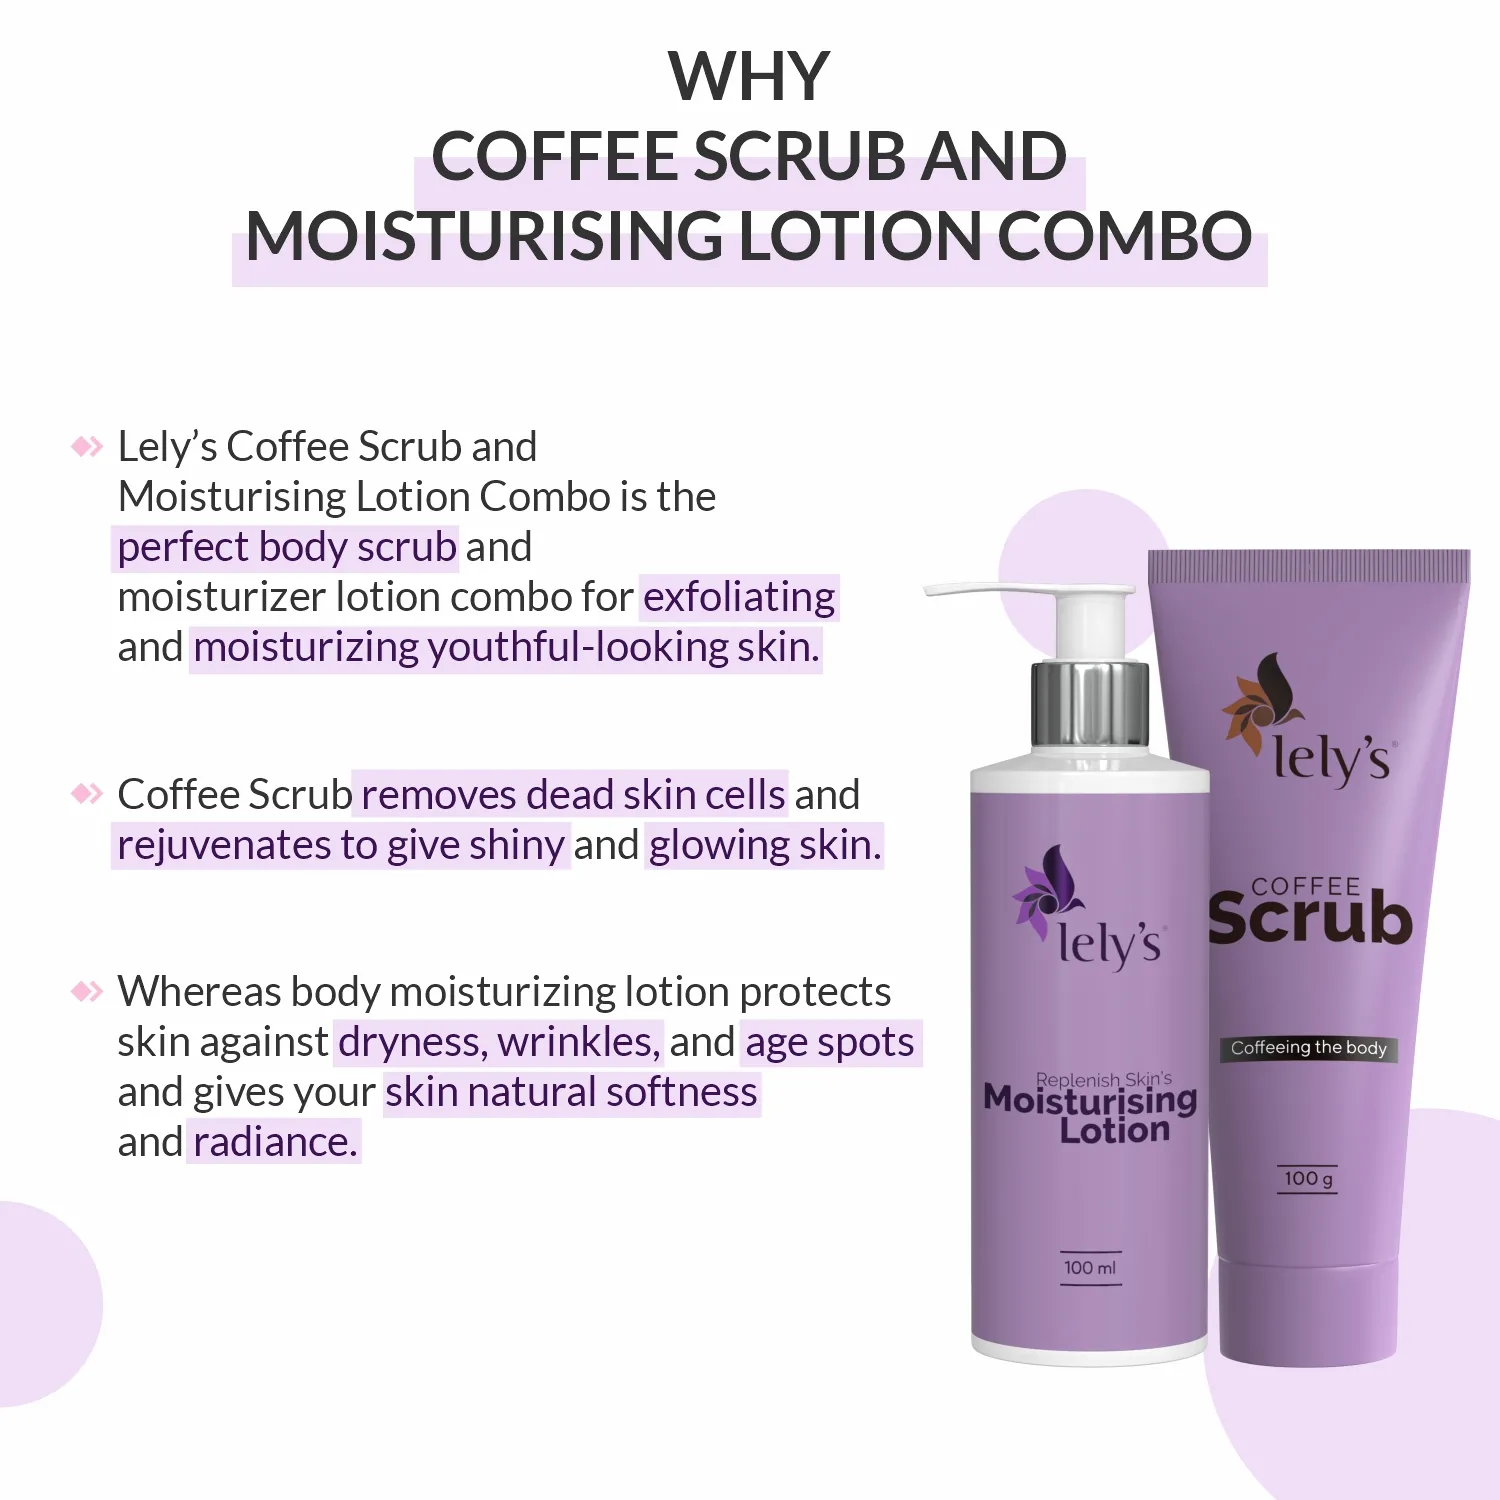 Coffee Scrub and Moisturising Lotion Combo why this combo